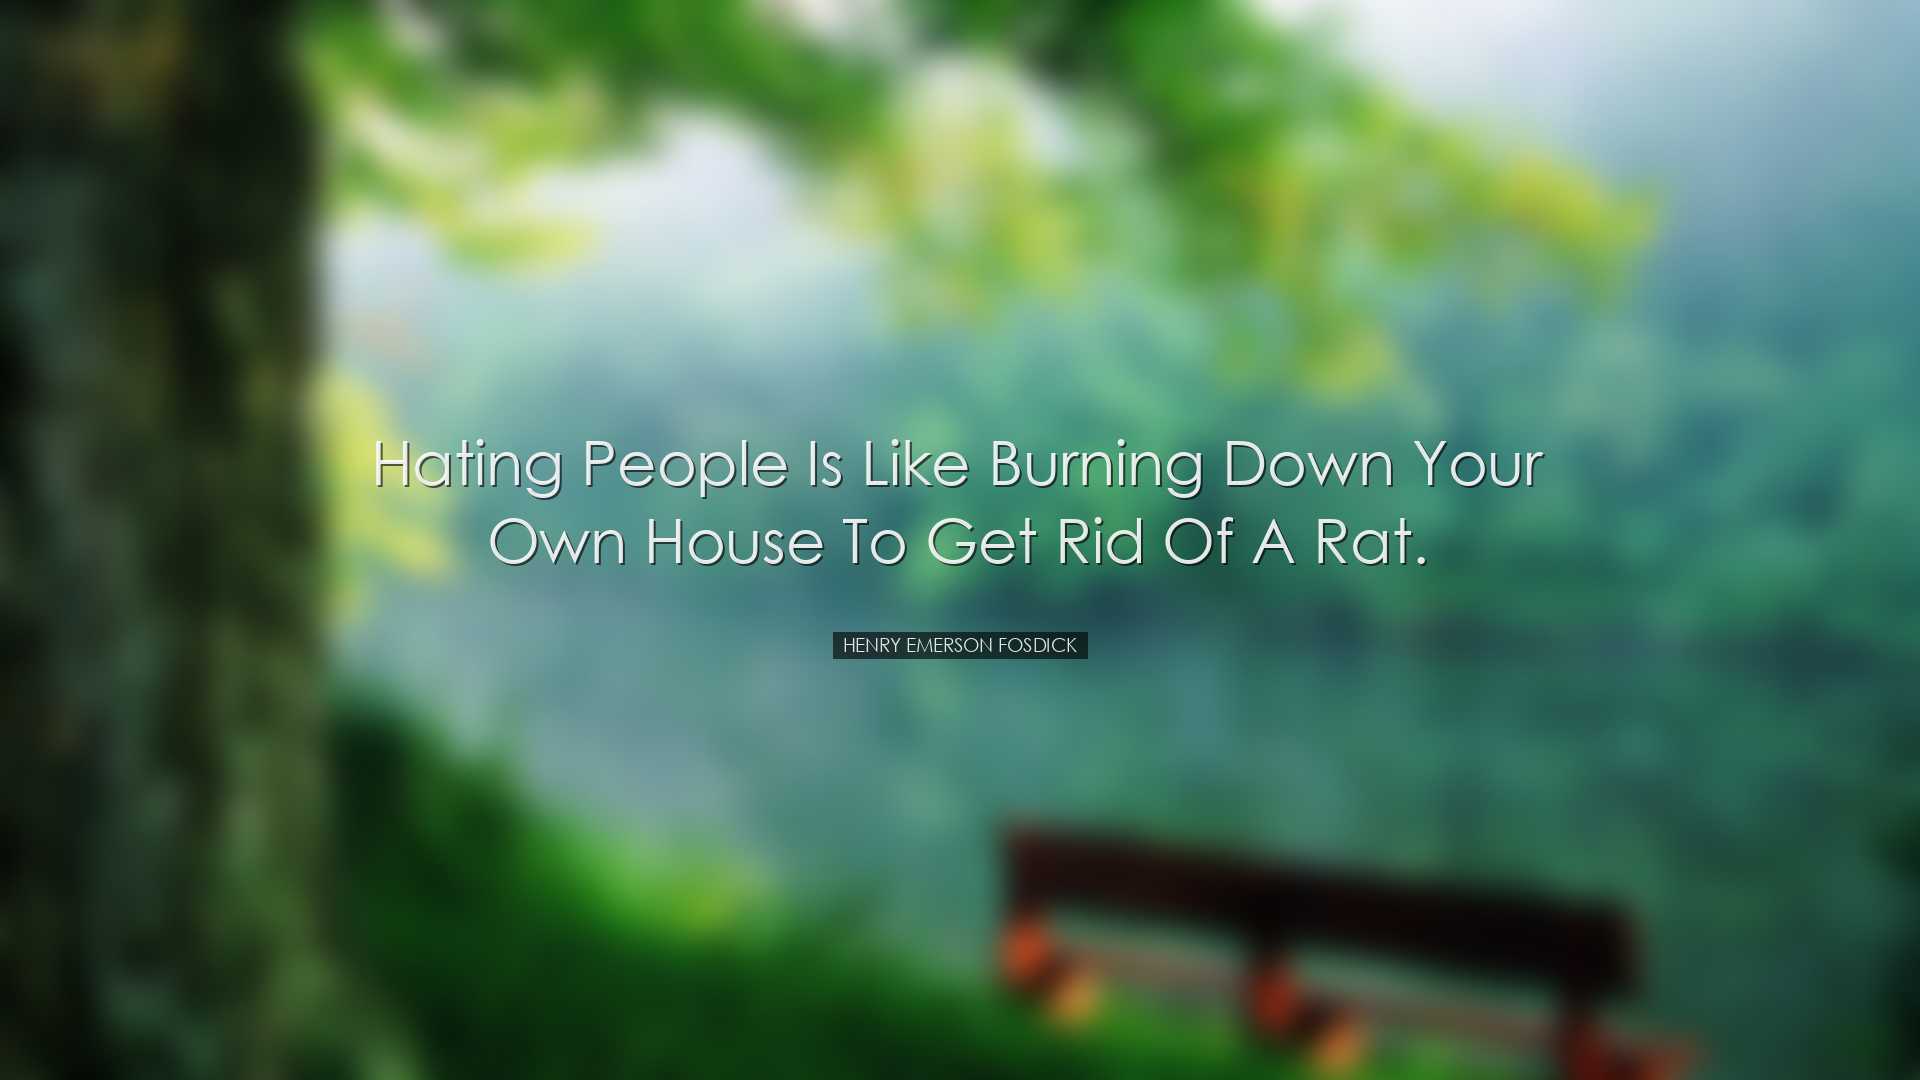 Hating people is like burning down your own house to get rid of a